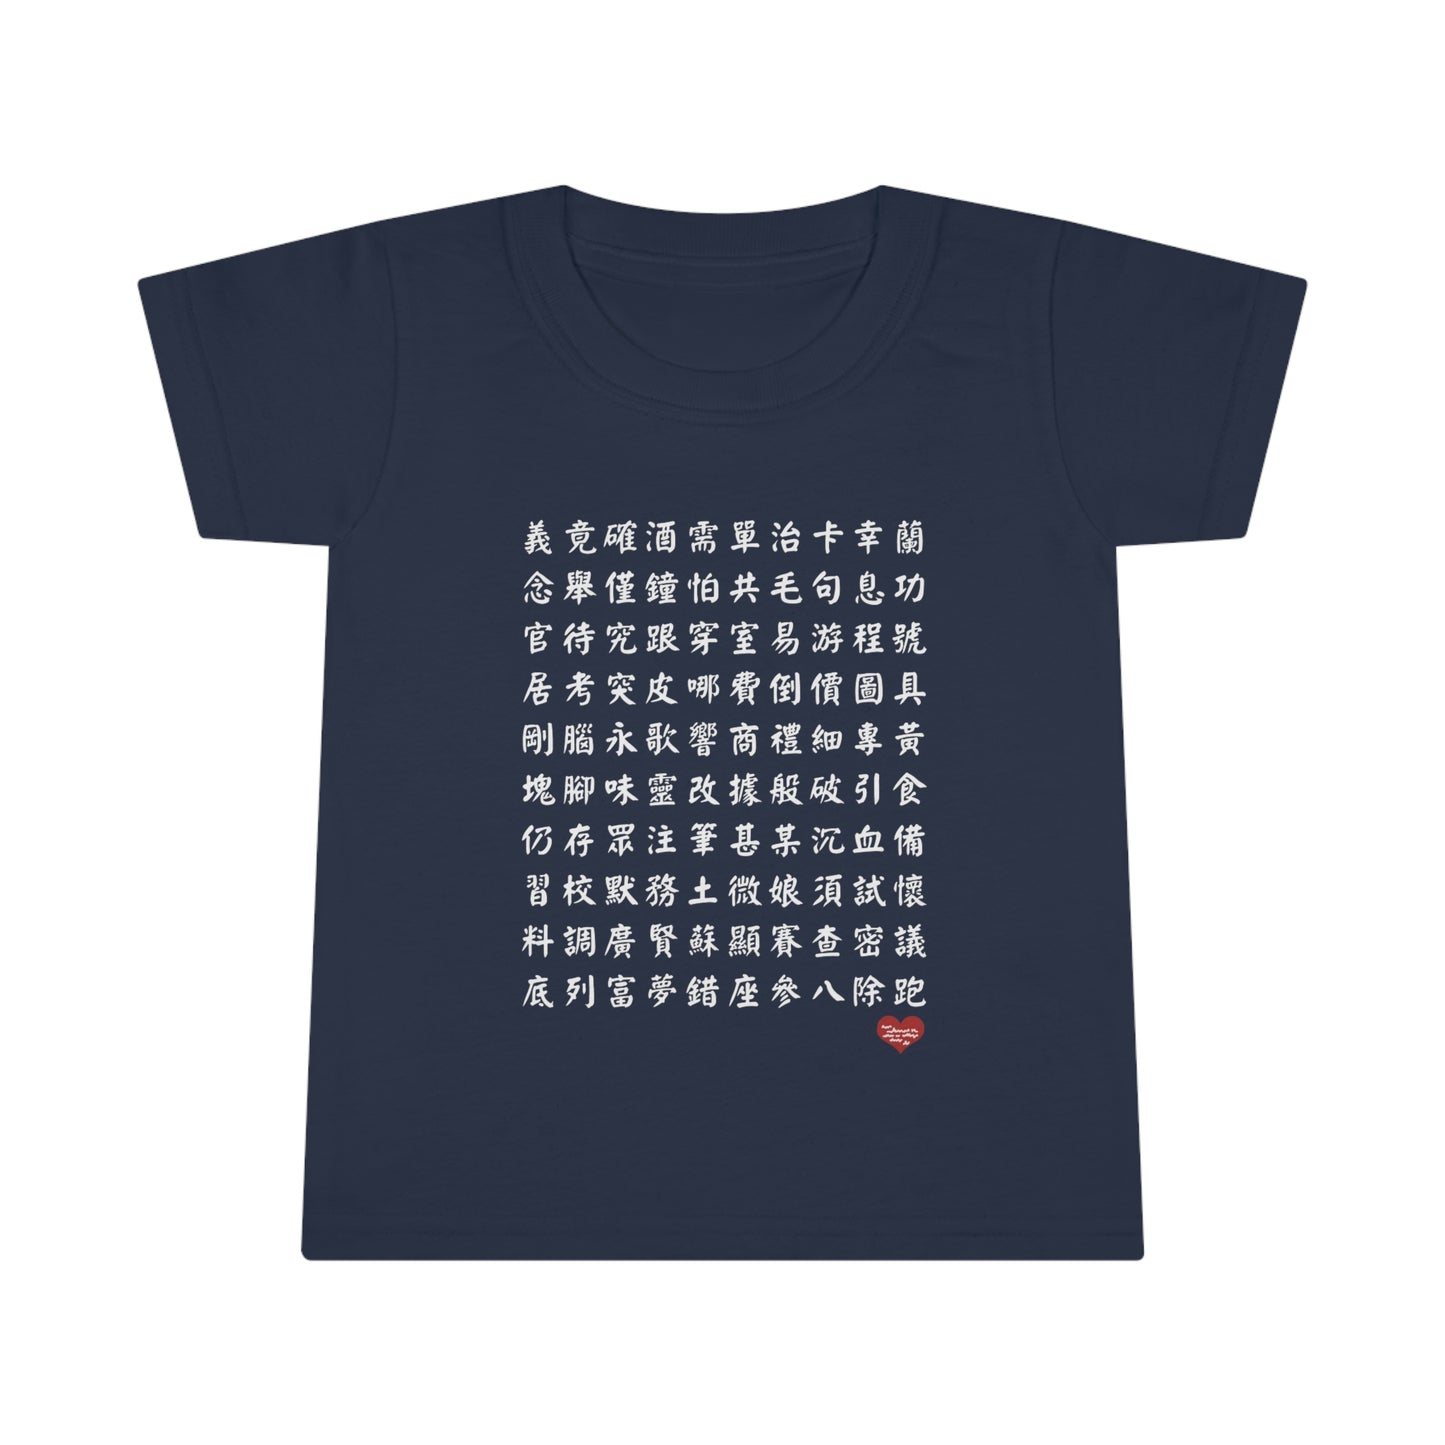 Toddler 1000 Characters Set 6,  1000漢字系列 #6 Color Block T-shirts